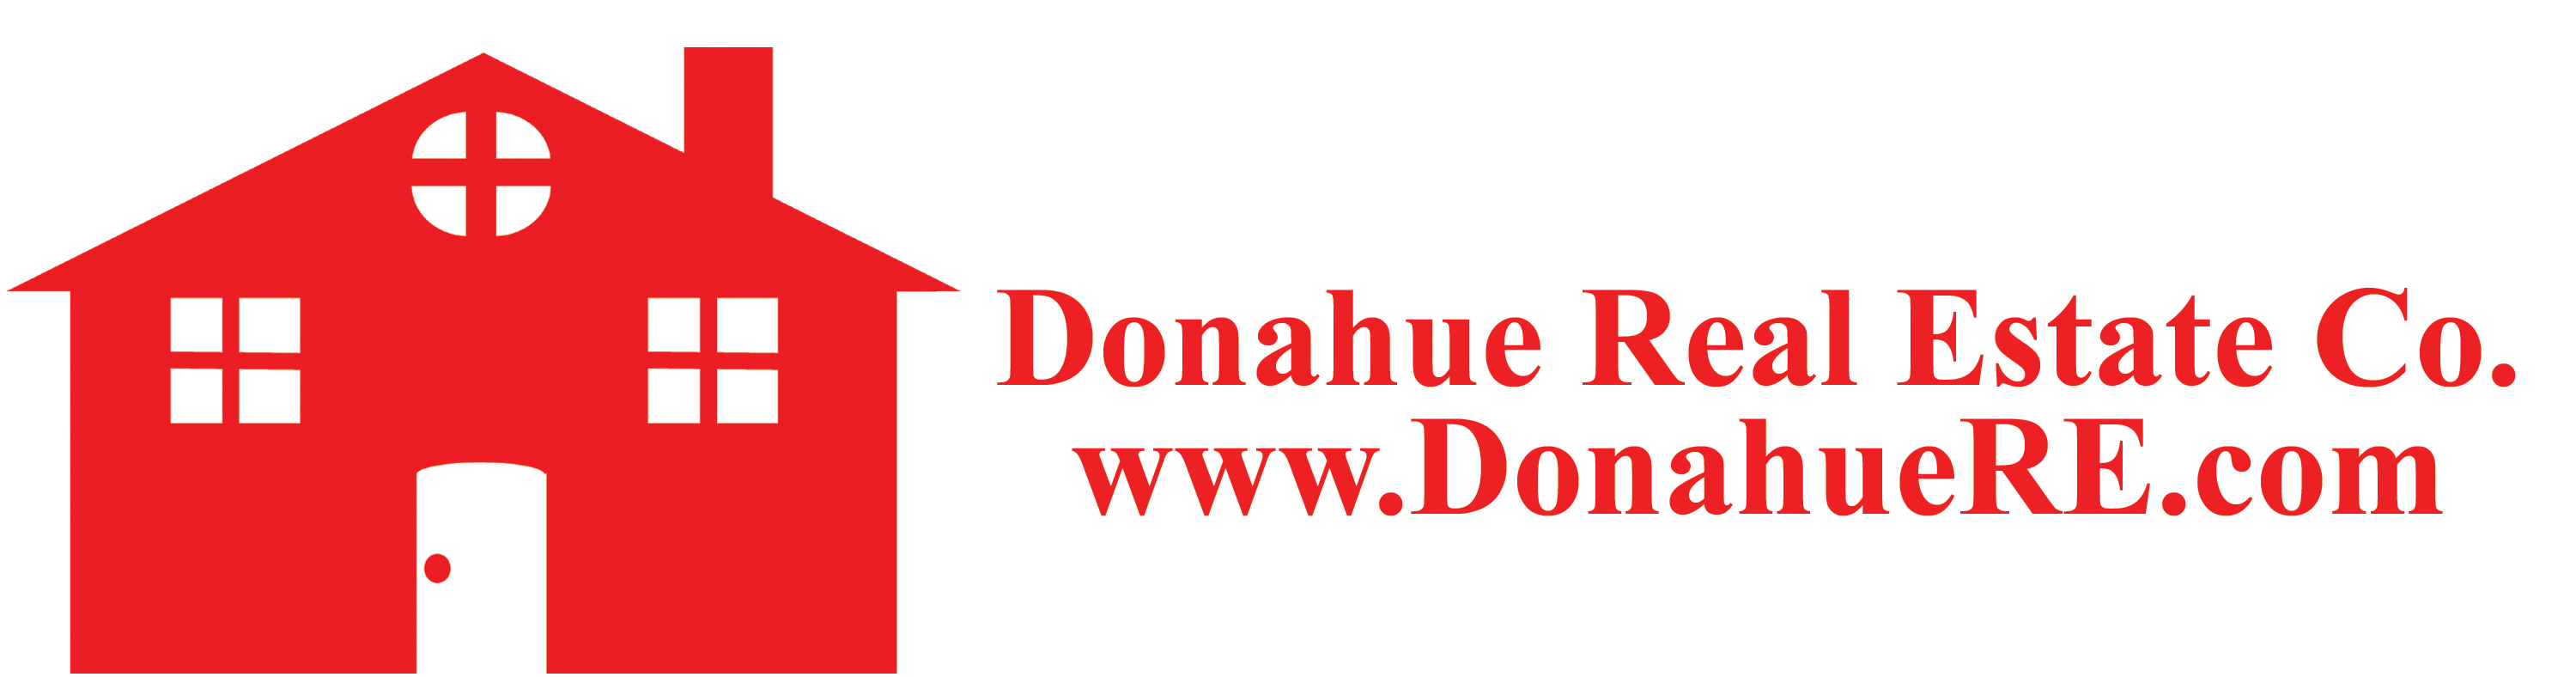 Donahue Real Estate Co.